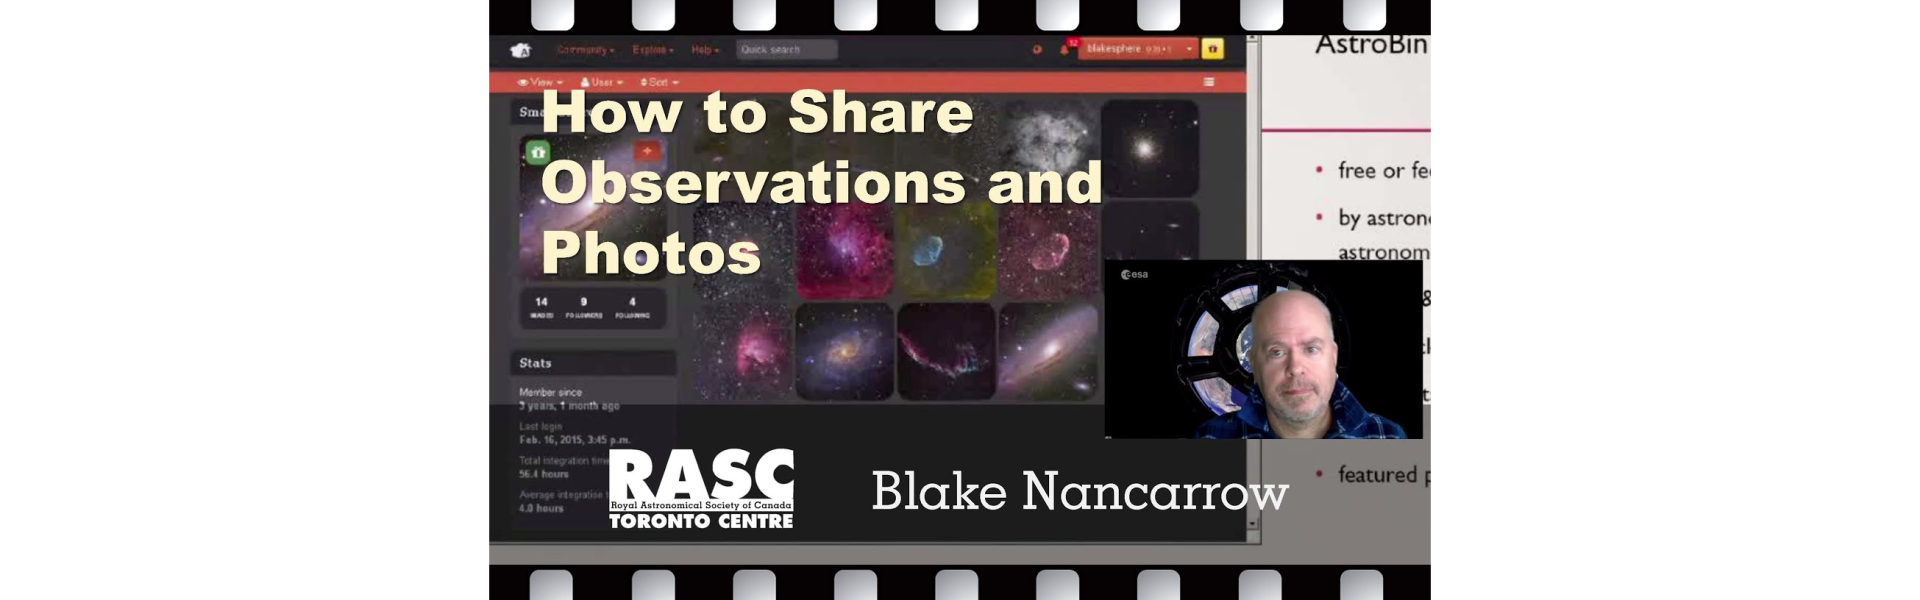 How to Share Observations and Photos